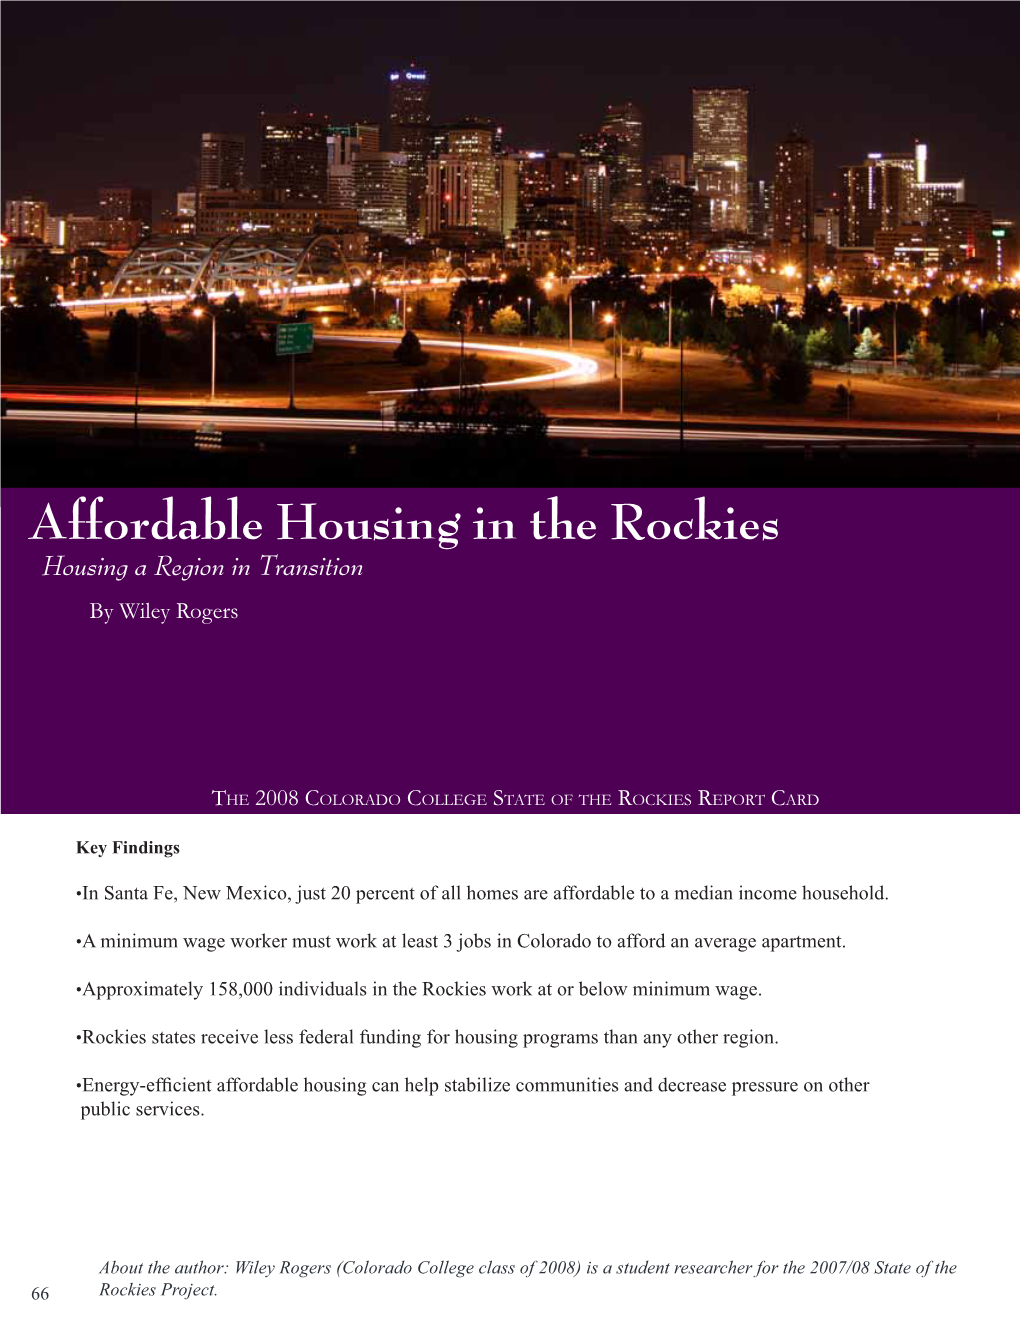 Affordable Housing in the Rockies Housing a Region in Transition by Wiley Rogers